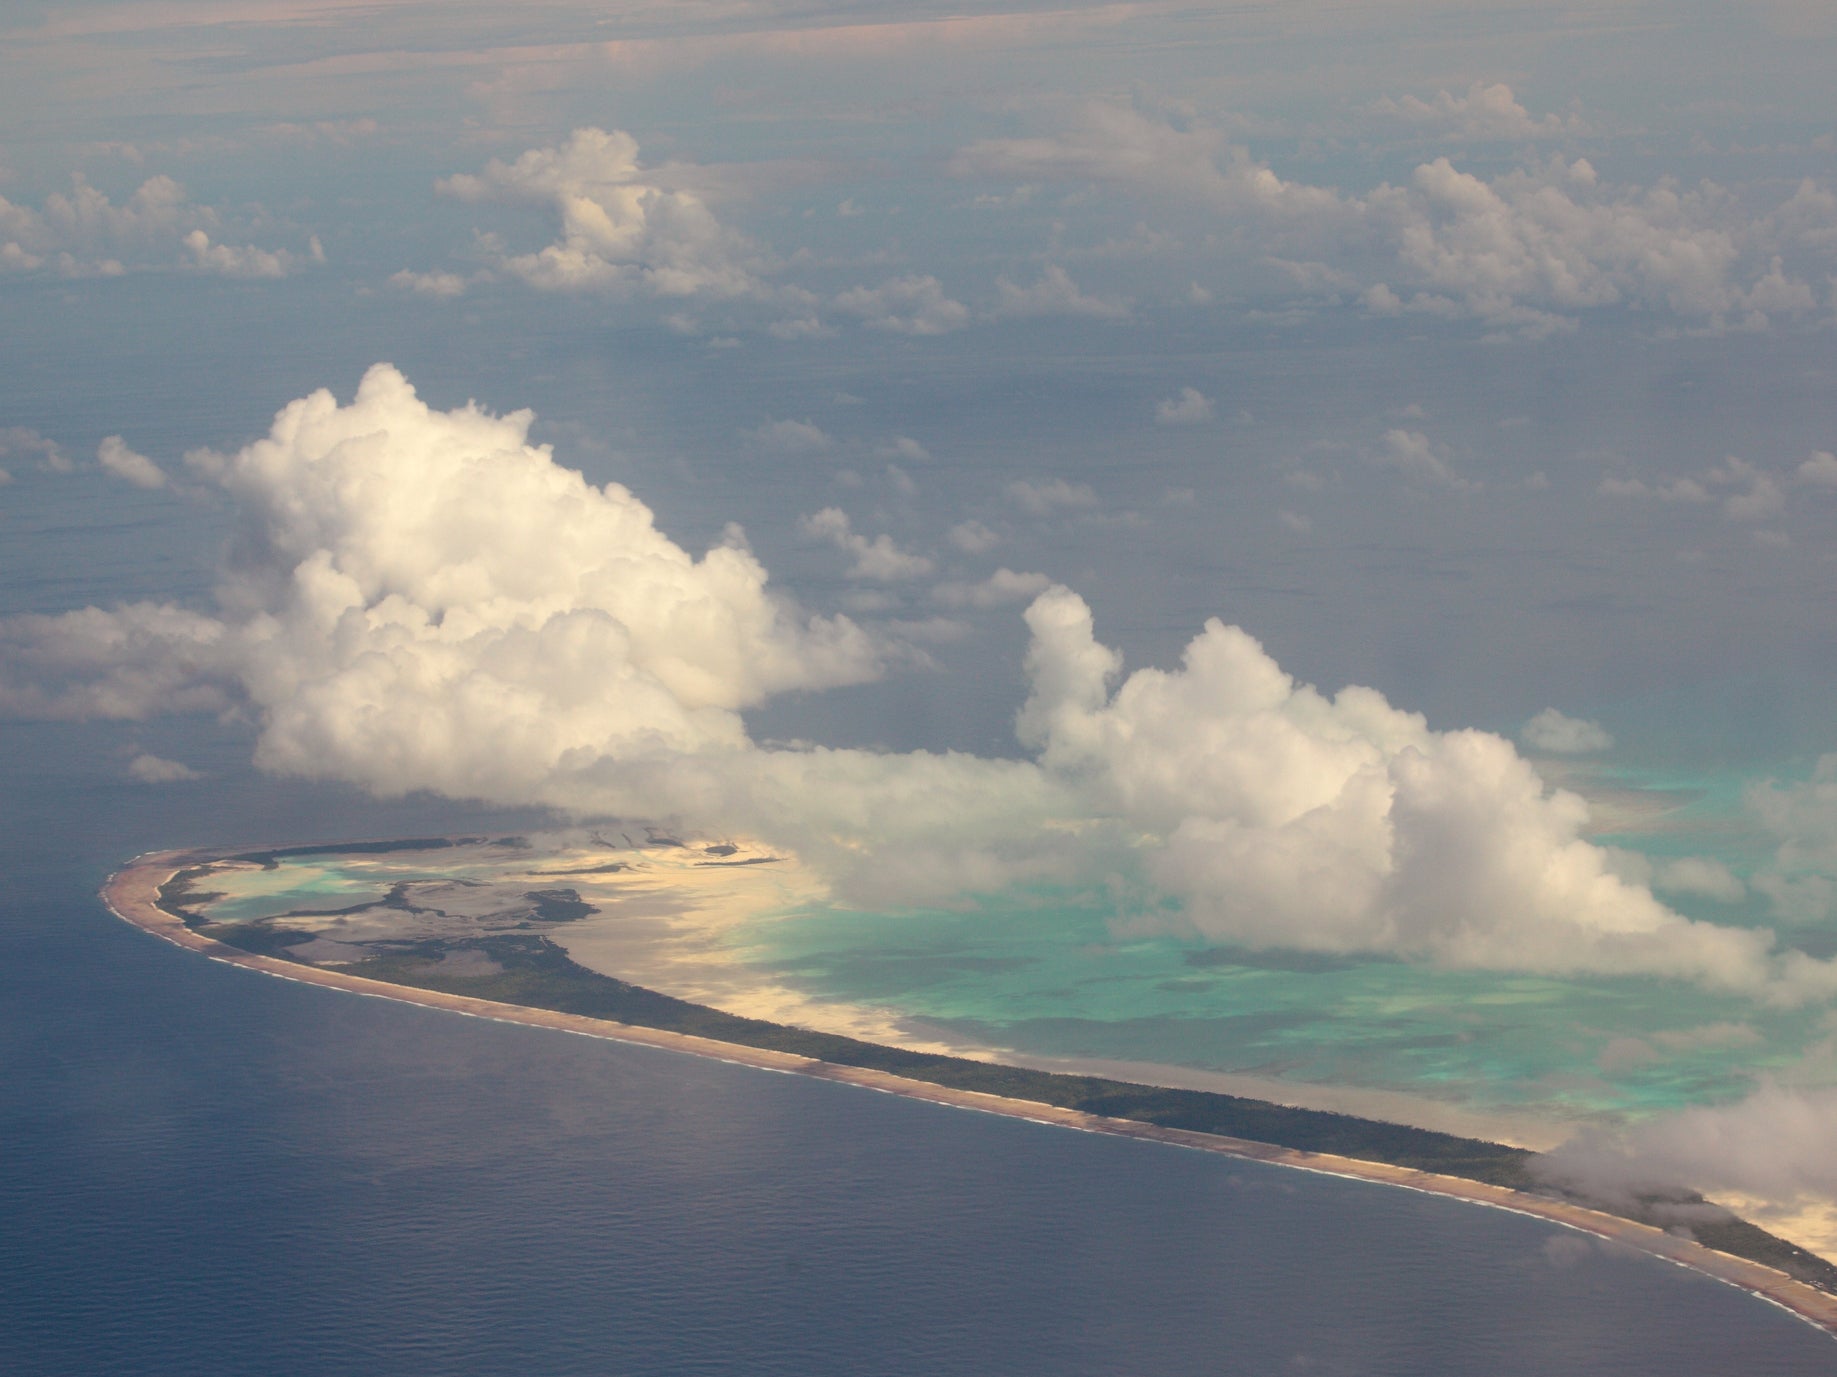 An island in the Republic of Kiribati. The country could be the first to be lost to rising sea levels